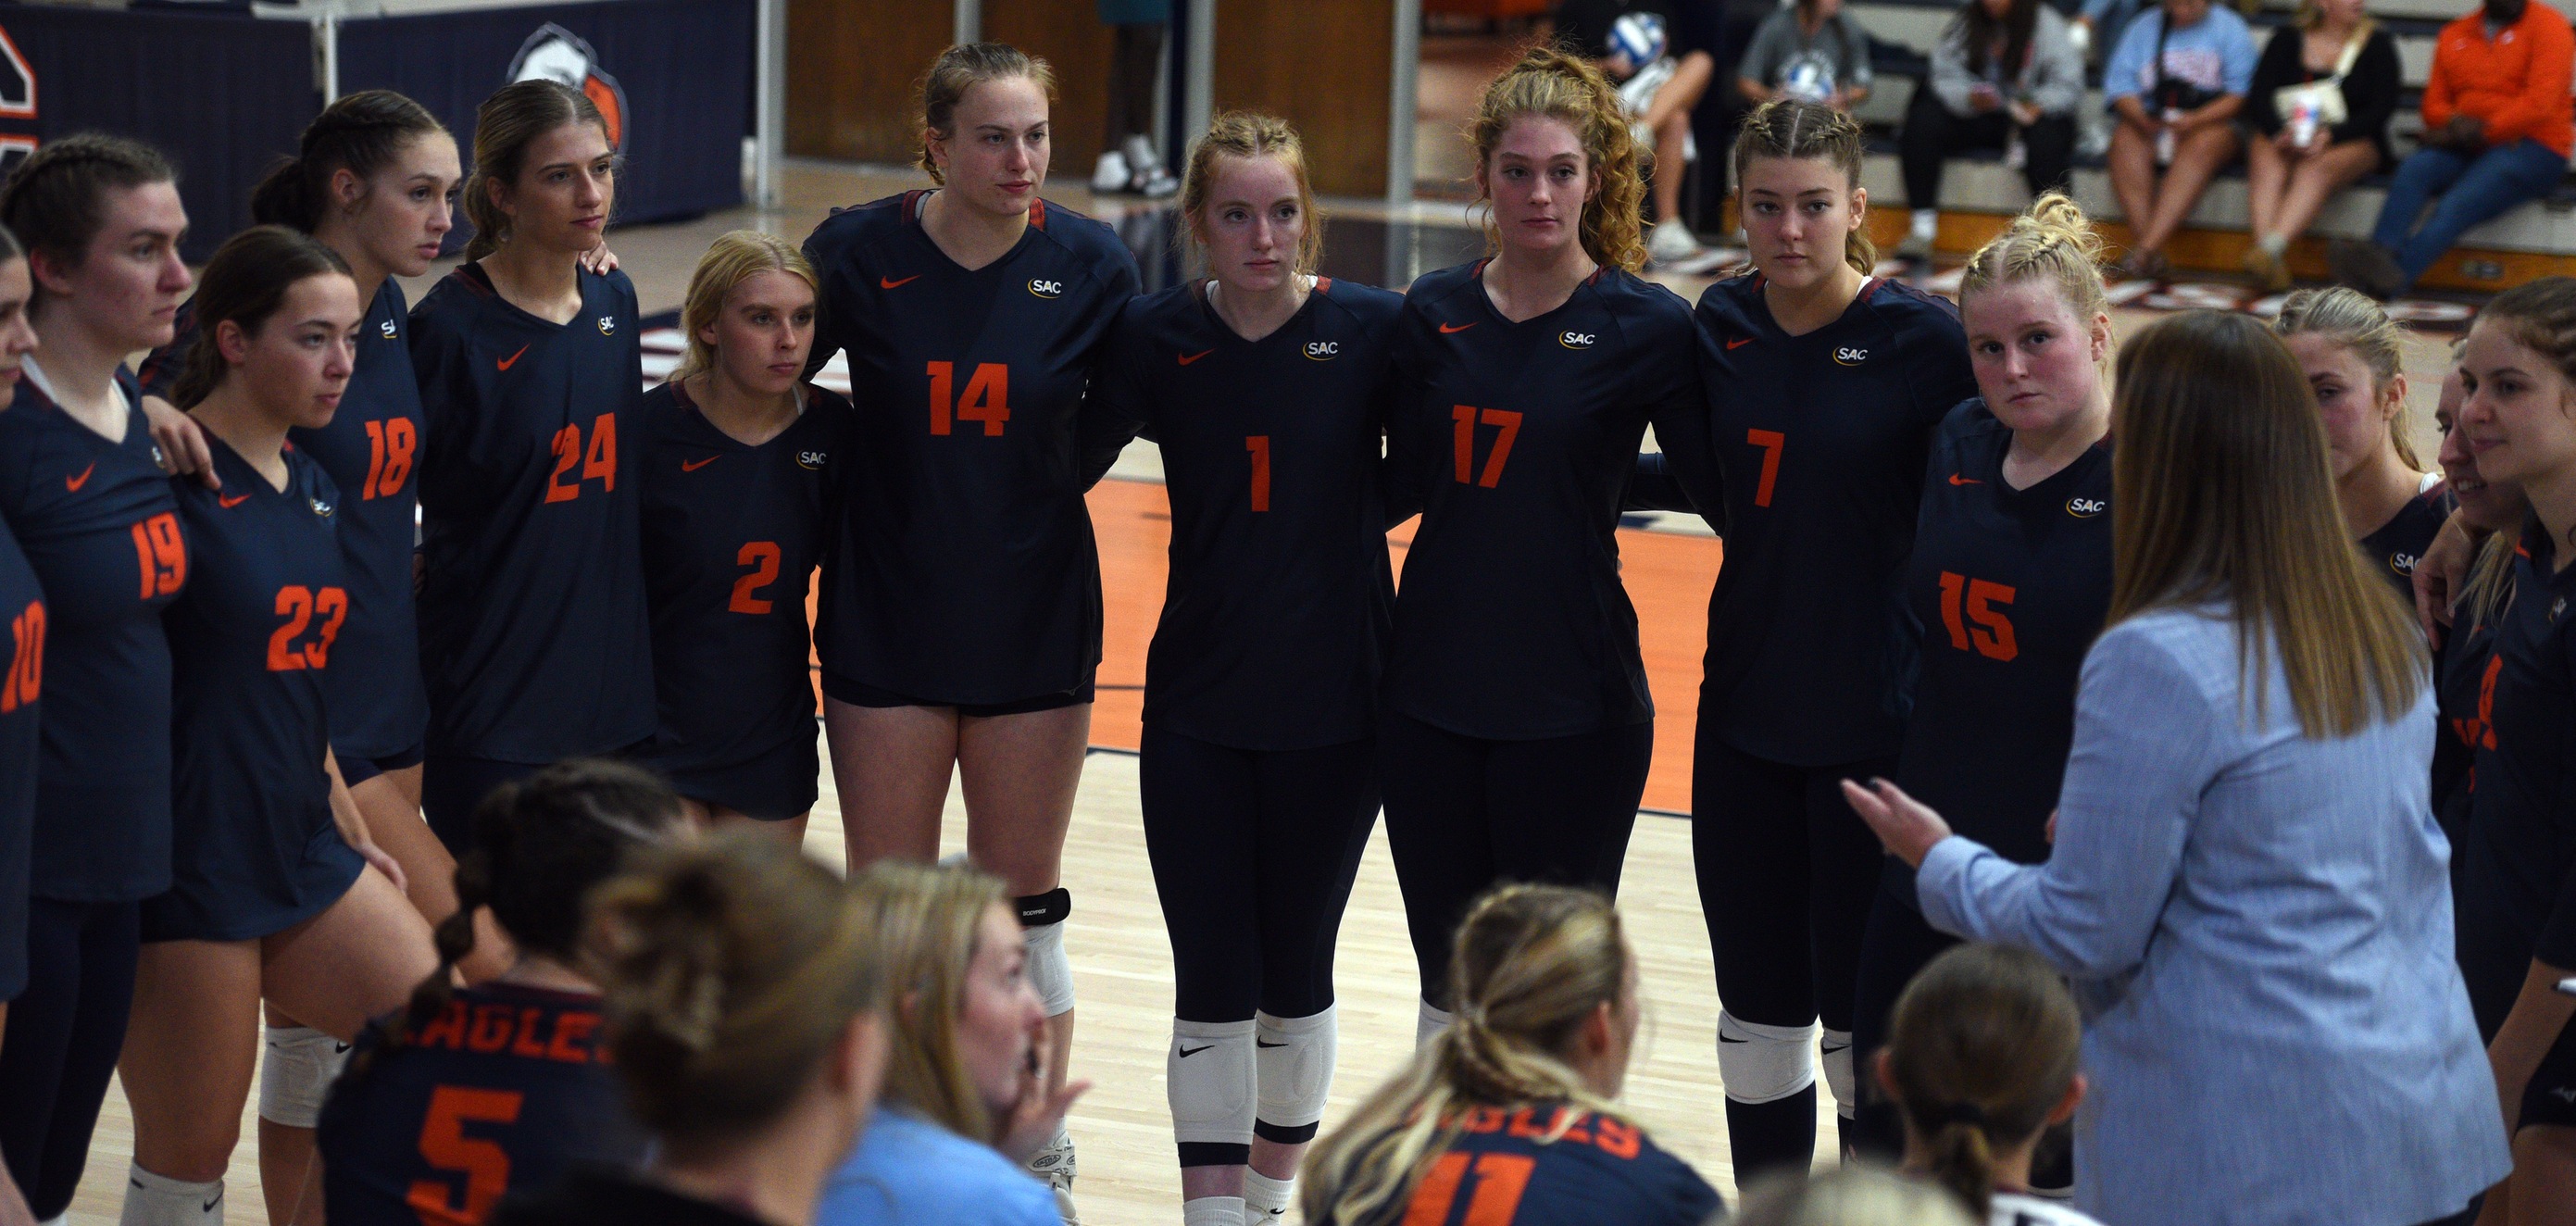 Volleyball season comes to a close, Eagles swept by Bears in SAC quarterfinal